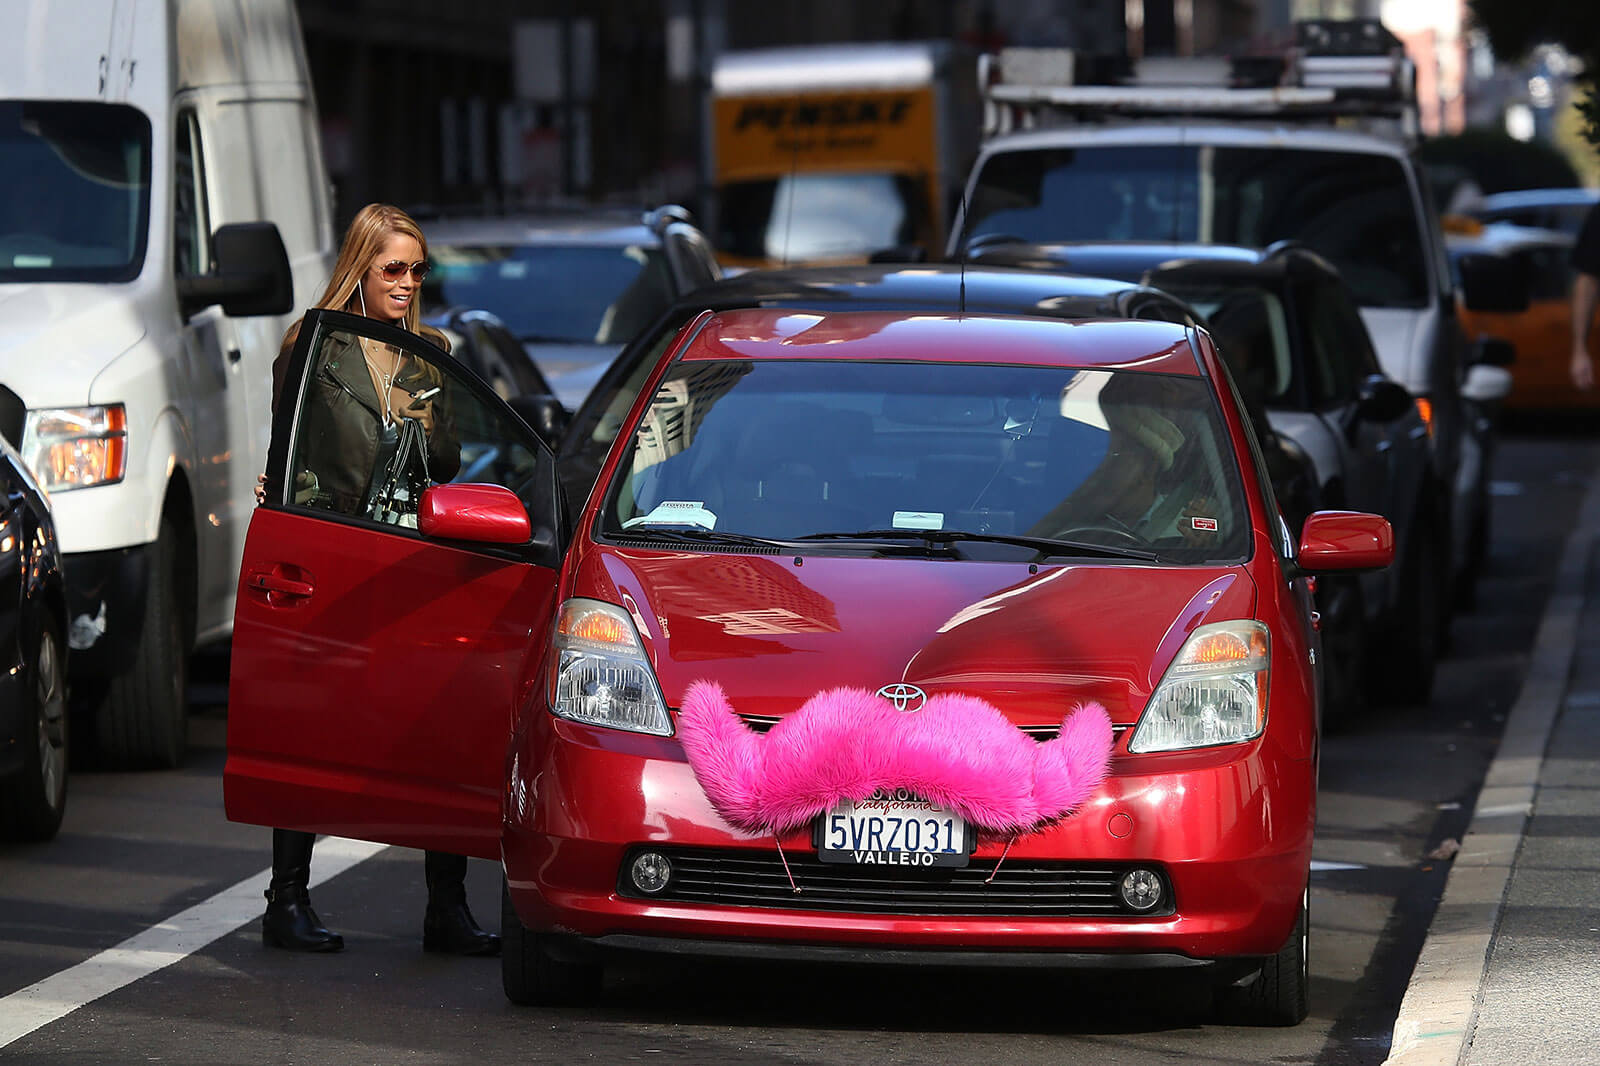 Project ‘Hell’ aims at Lyft